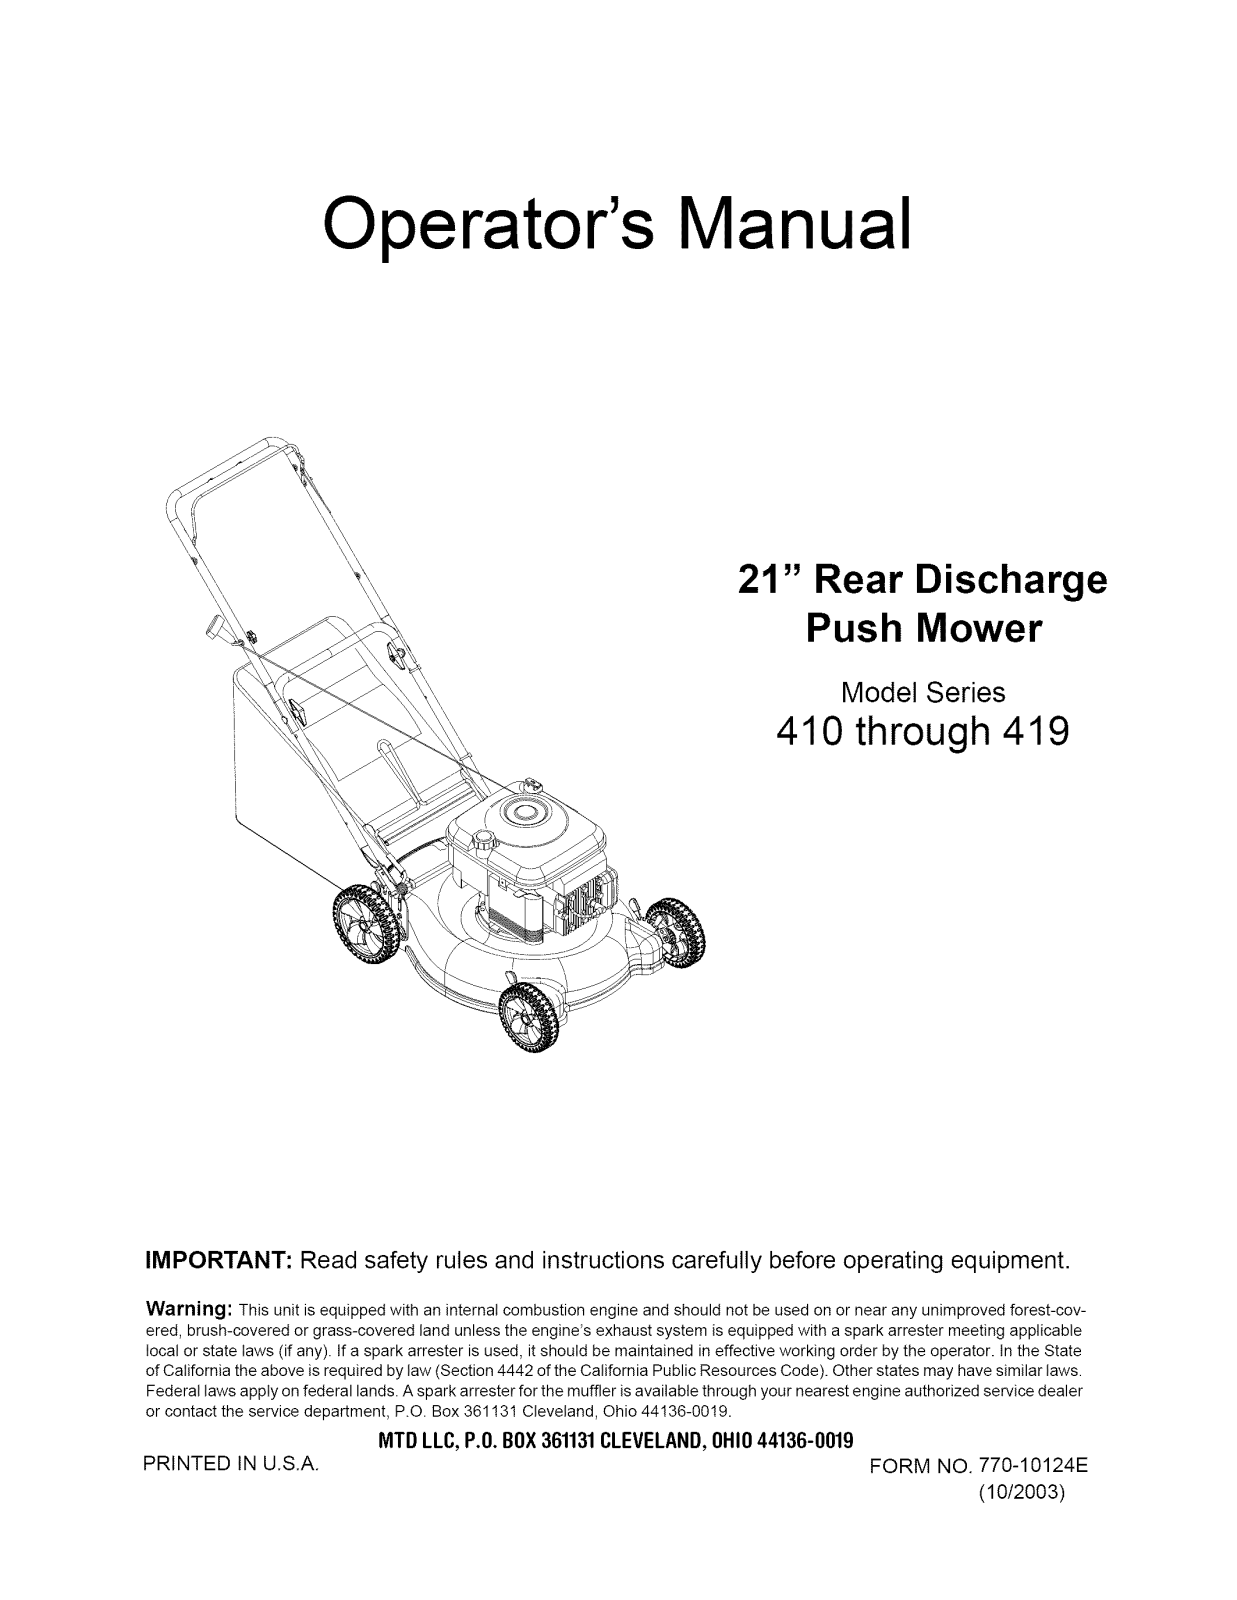 MTD 11A-414E765 Owner’s Manual